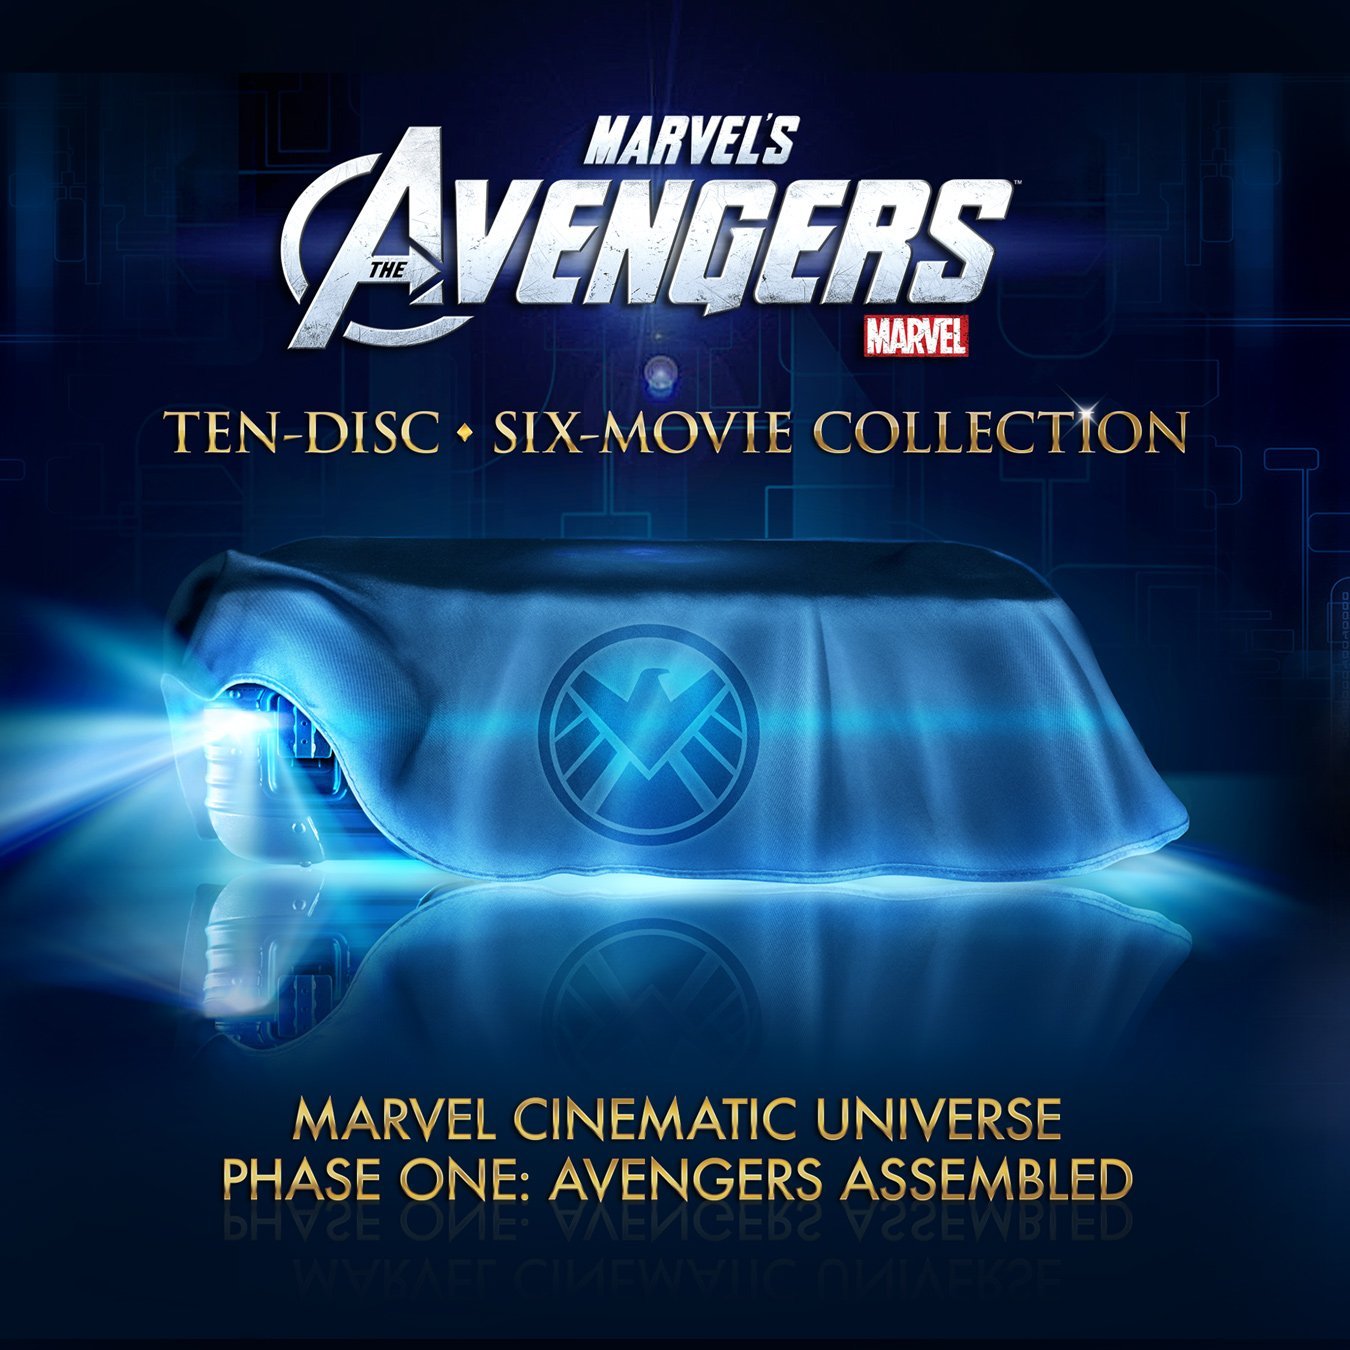 Trailers for Marvel Cinematic Universe and The Avengers